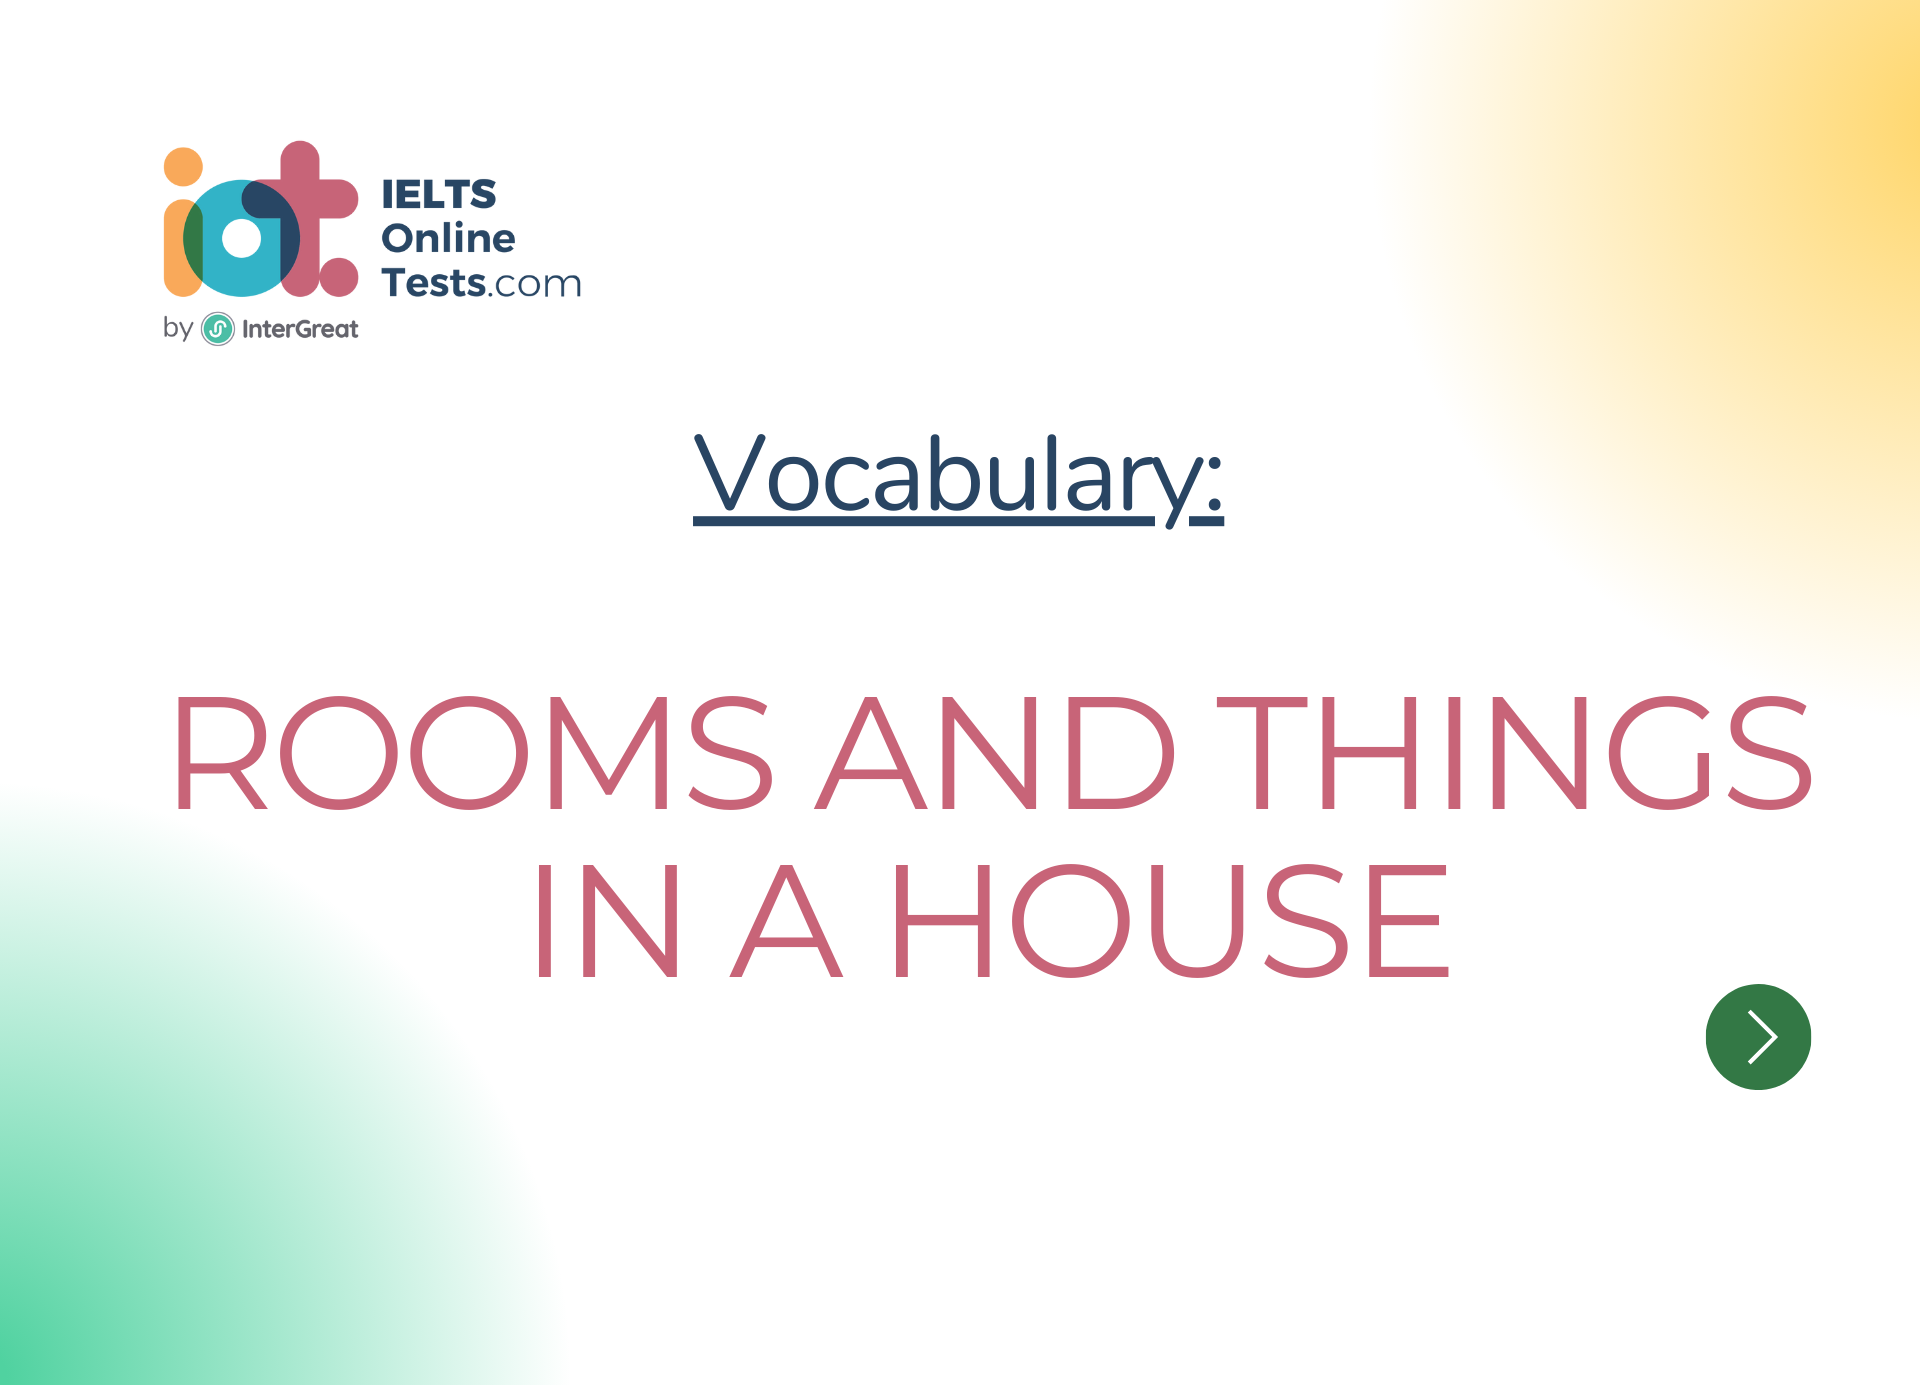 Rooms and things in the house